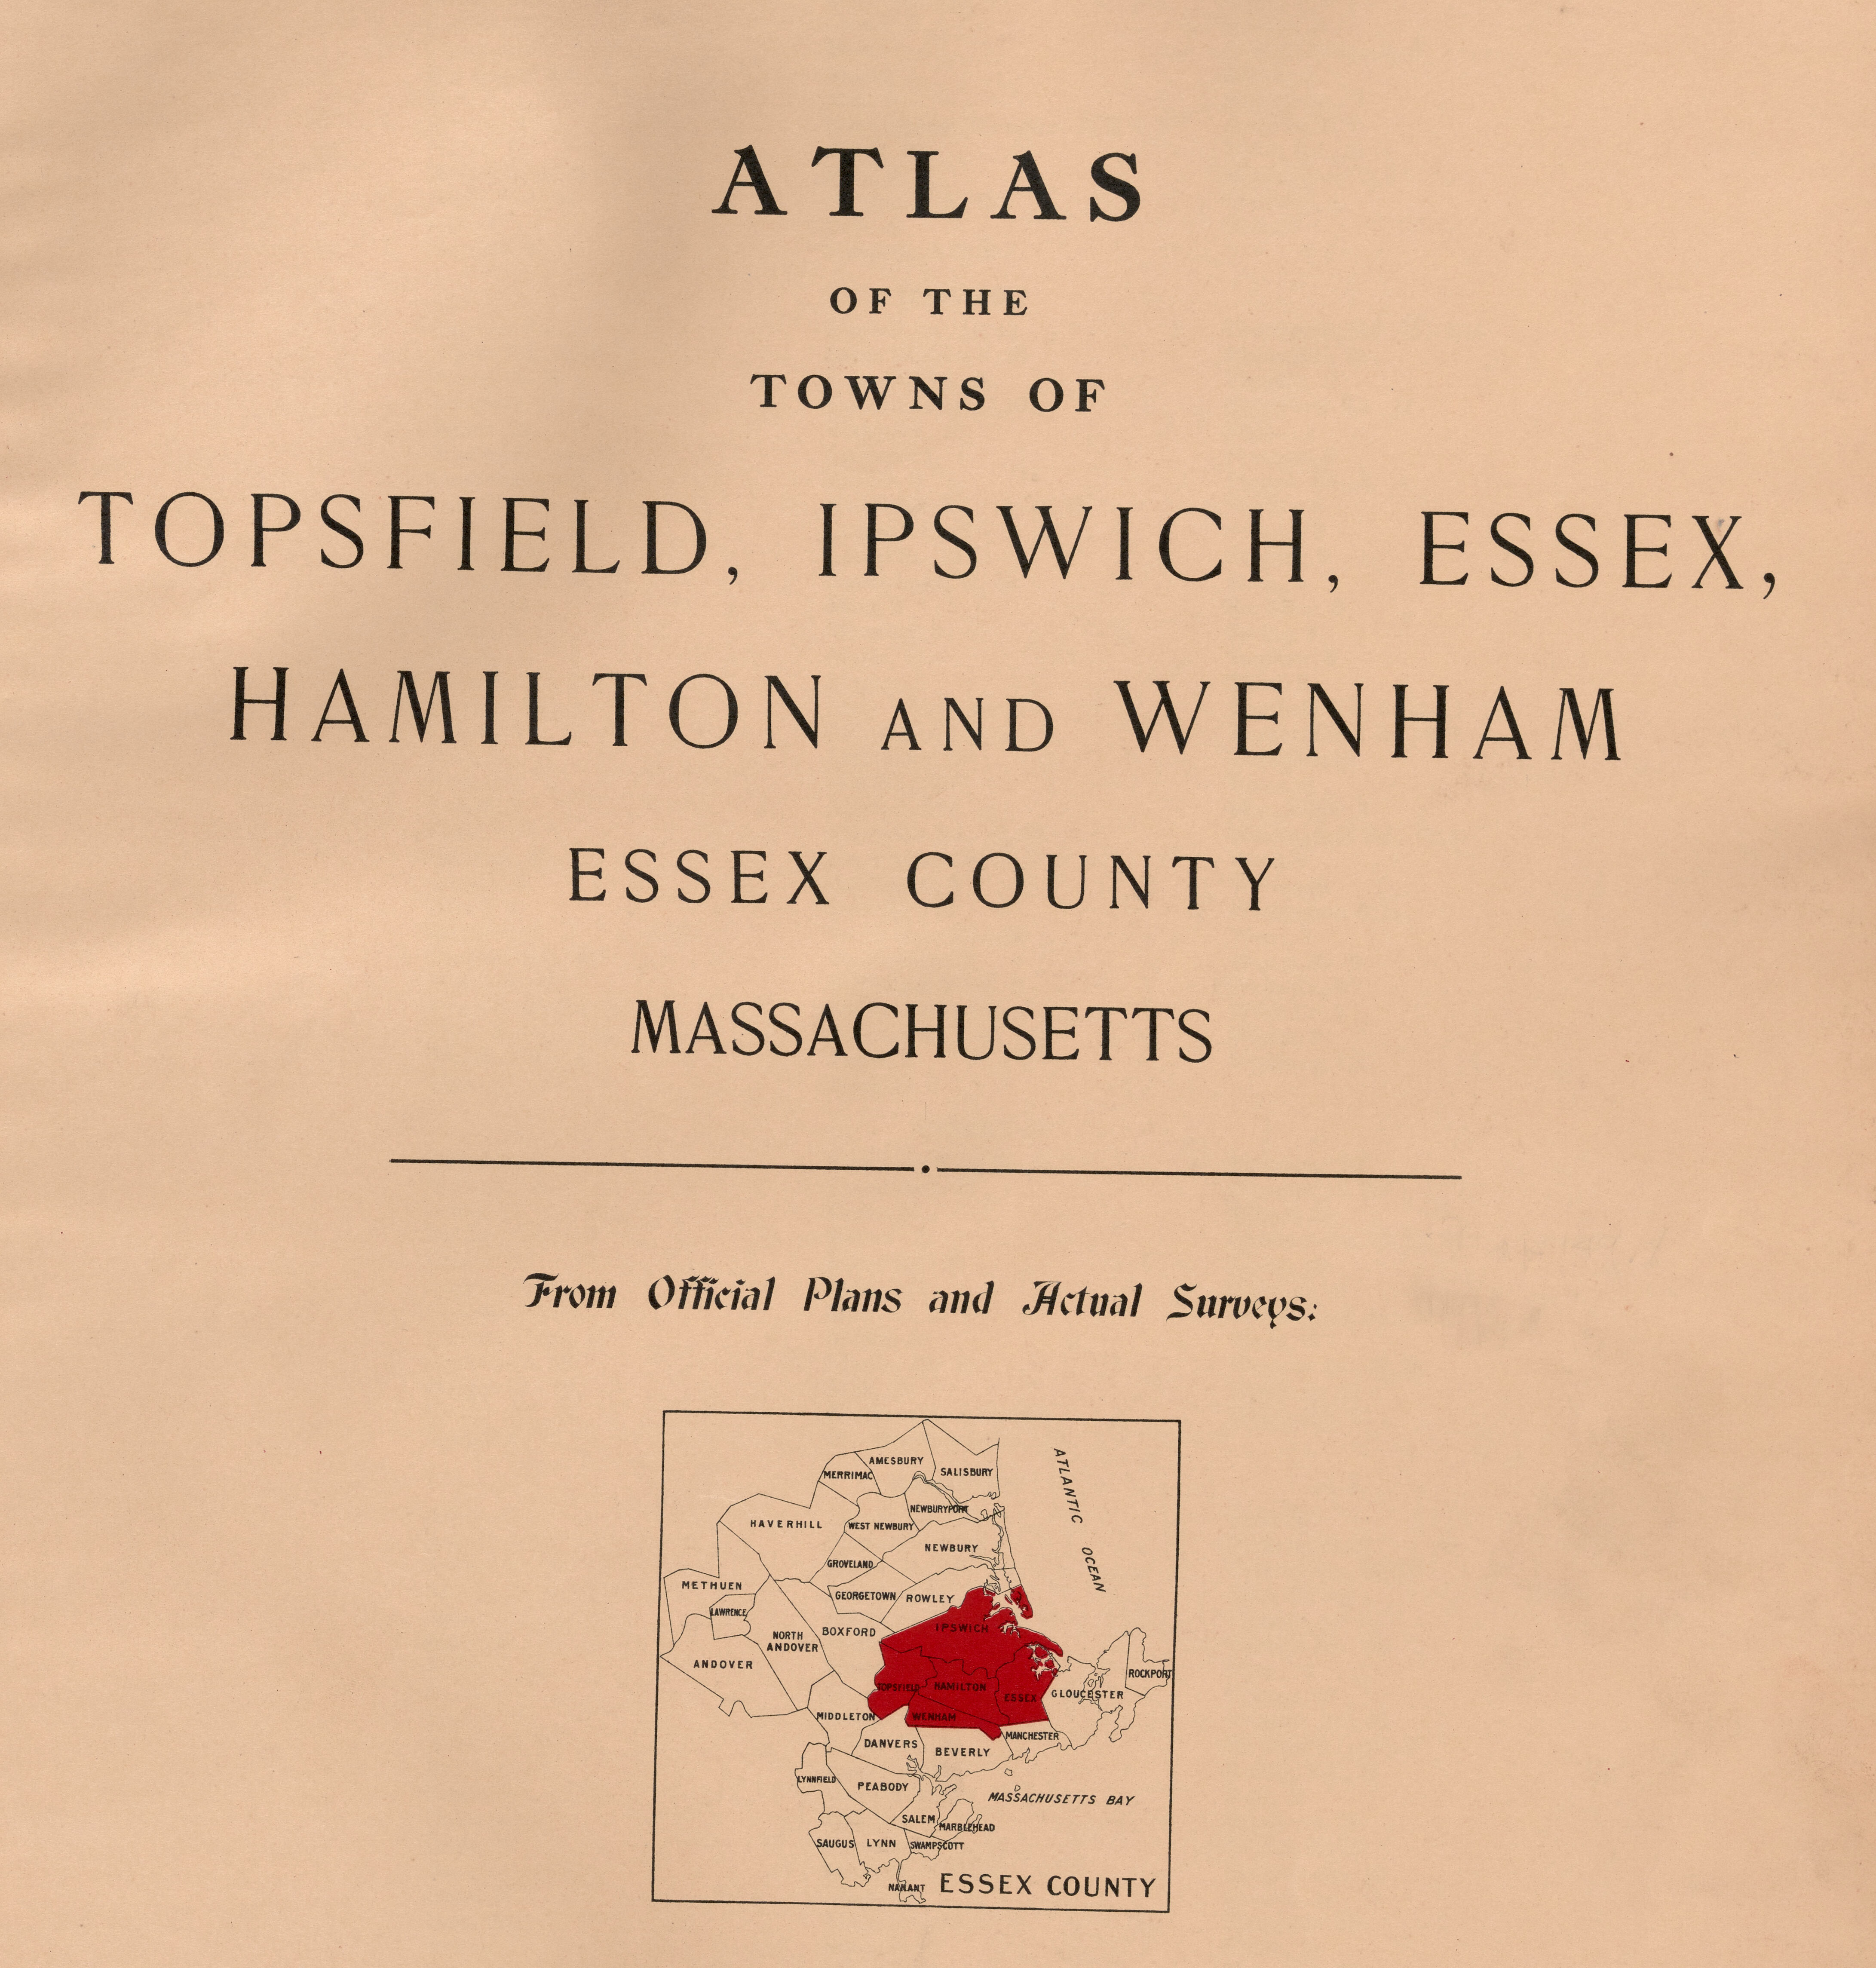 The atlas was made in 1910 and contains maps made from Official Plans and Actual Surveys